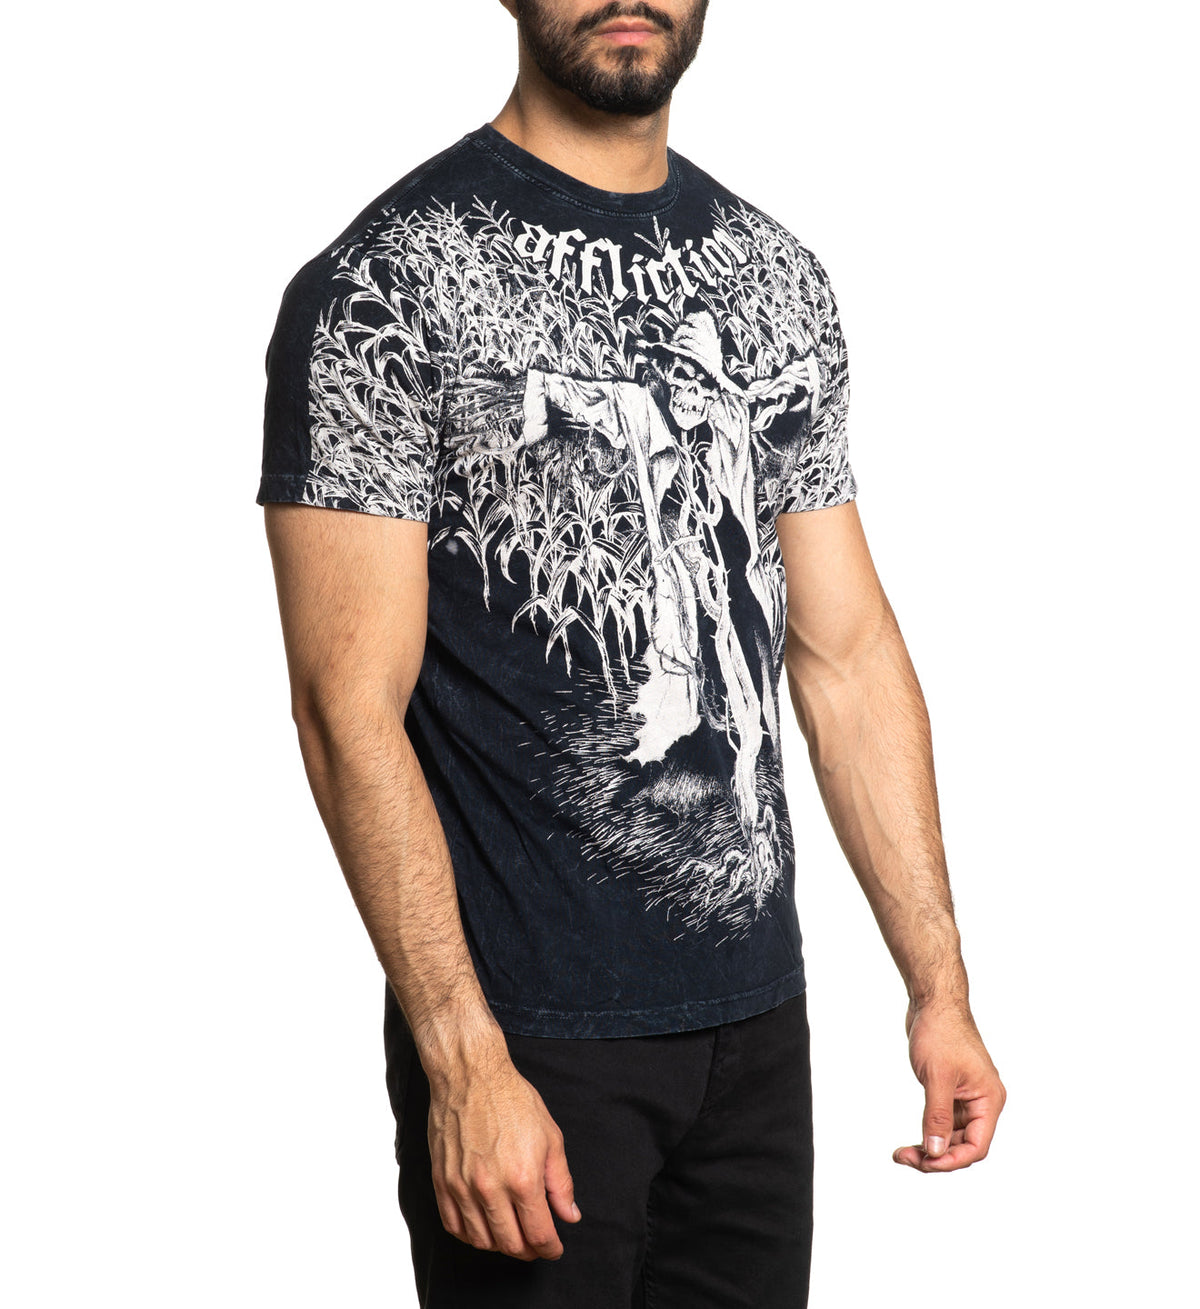 Scarecrow - Affliction Clothing